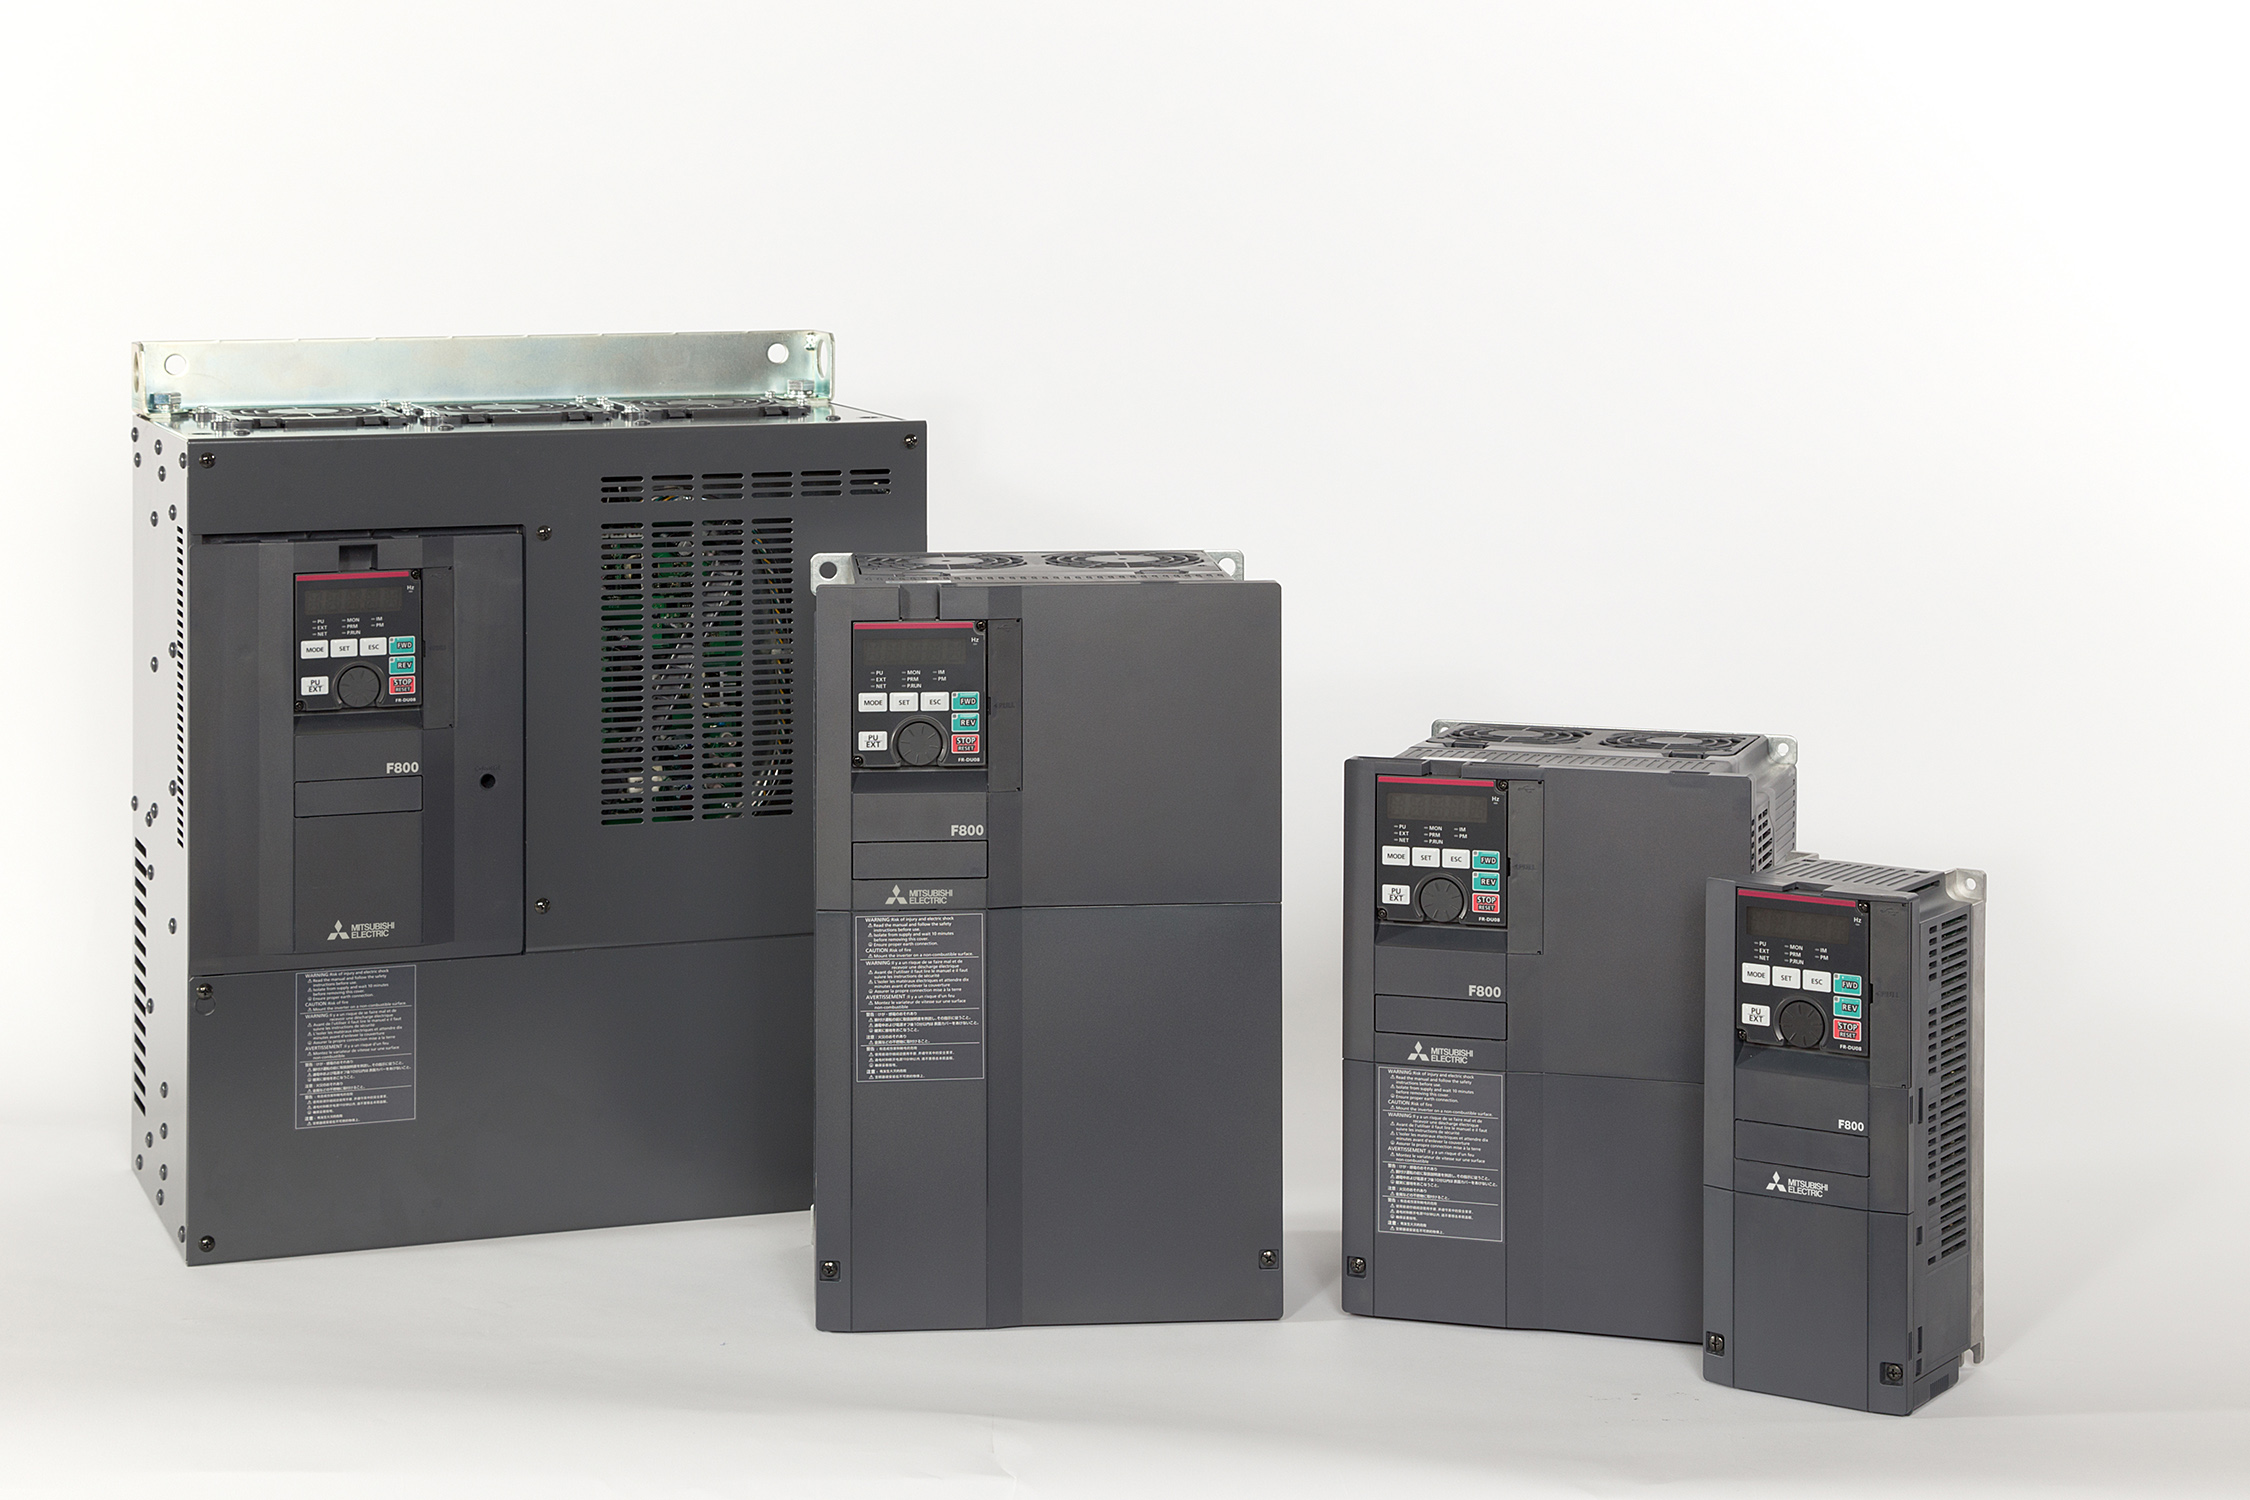 Mitsubishi Electric’s FR-F800 series of VSDs is designed specifically to work with fans and pumps to deliver smooth ramp-up, fast response and high electrical efficiency. [Source: Mitsubishi Electric Europe B.V.]